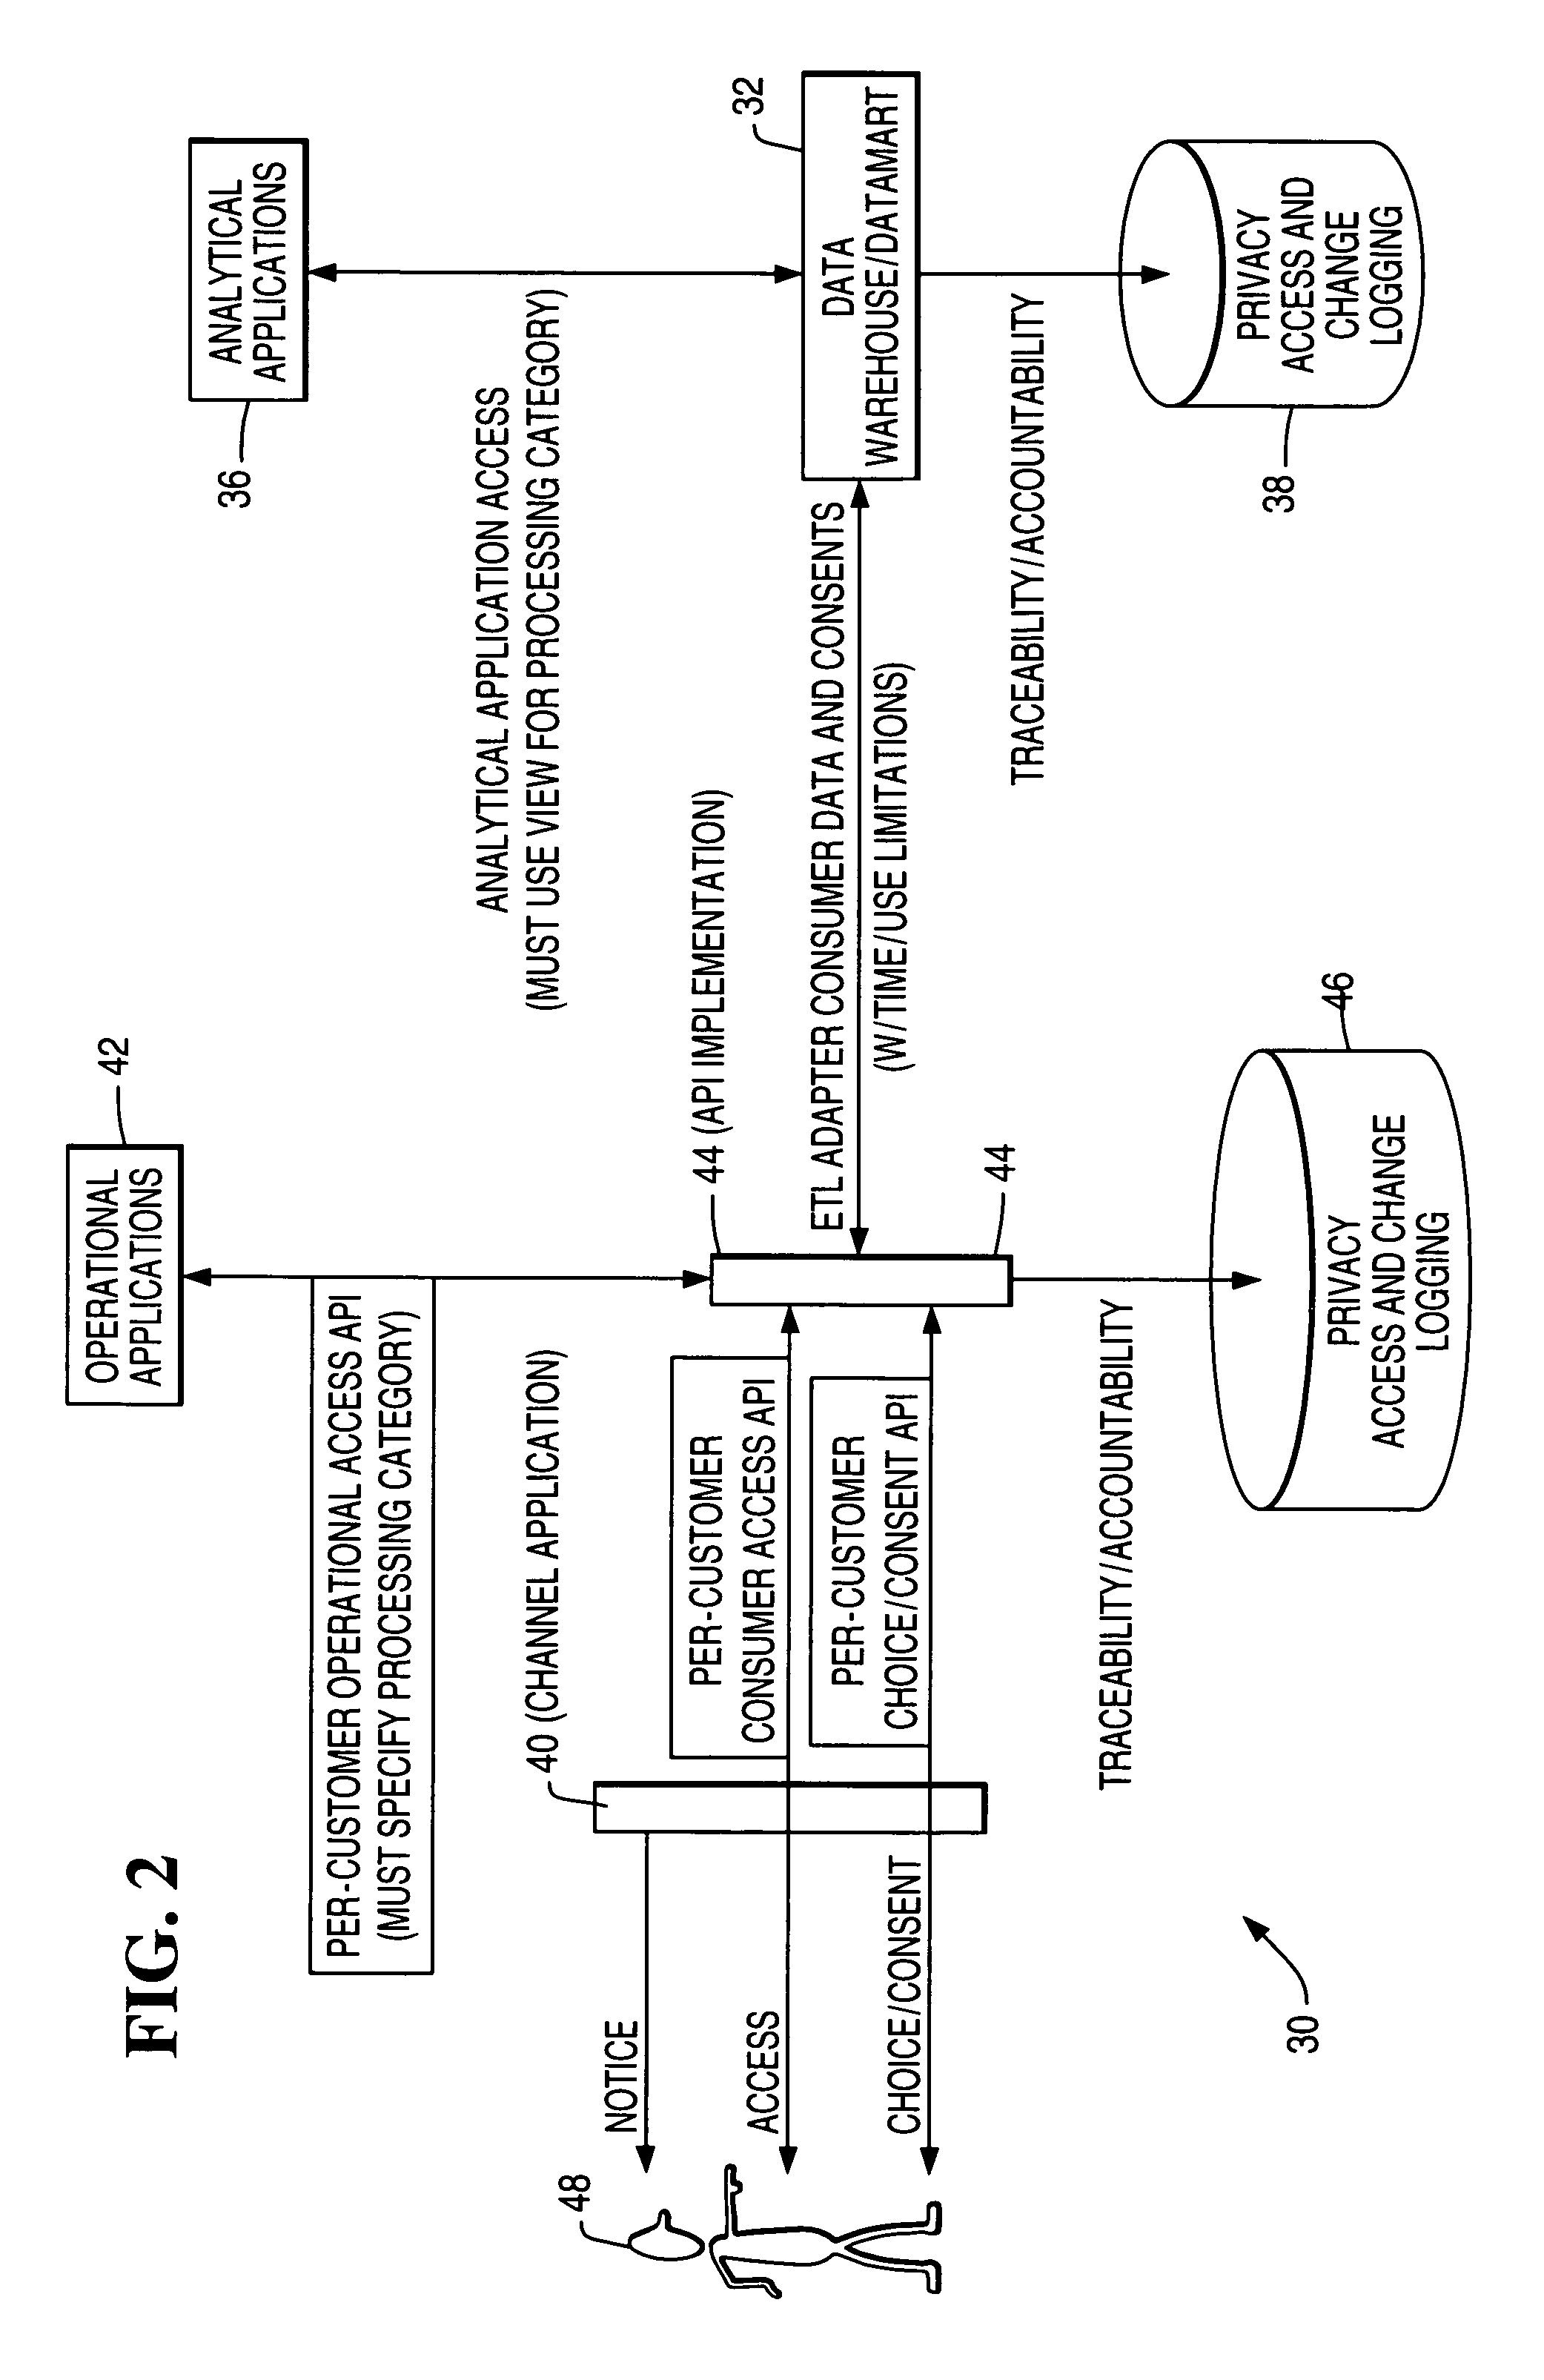 Architecture and method for operational privacy in business services